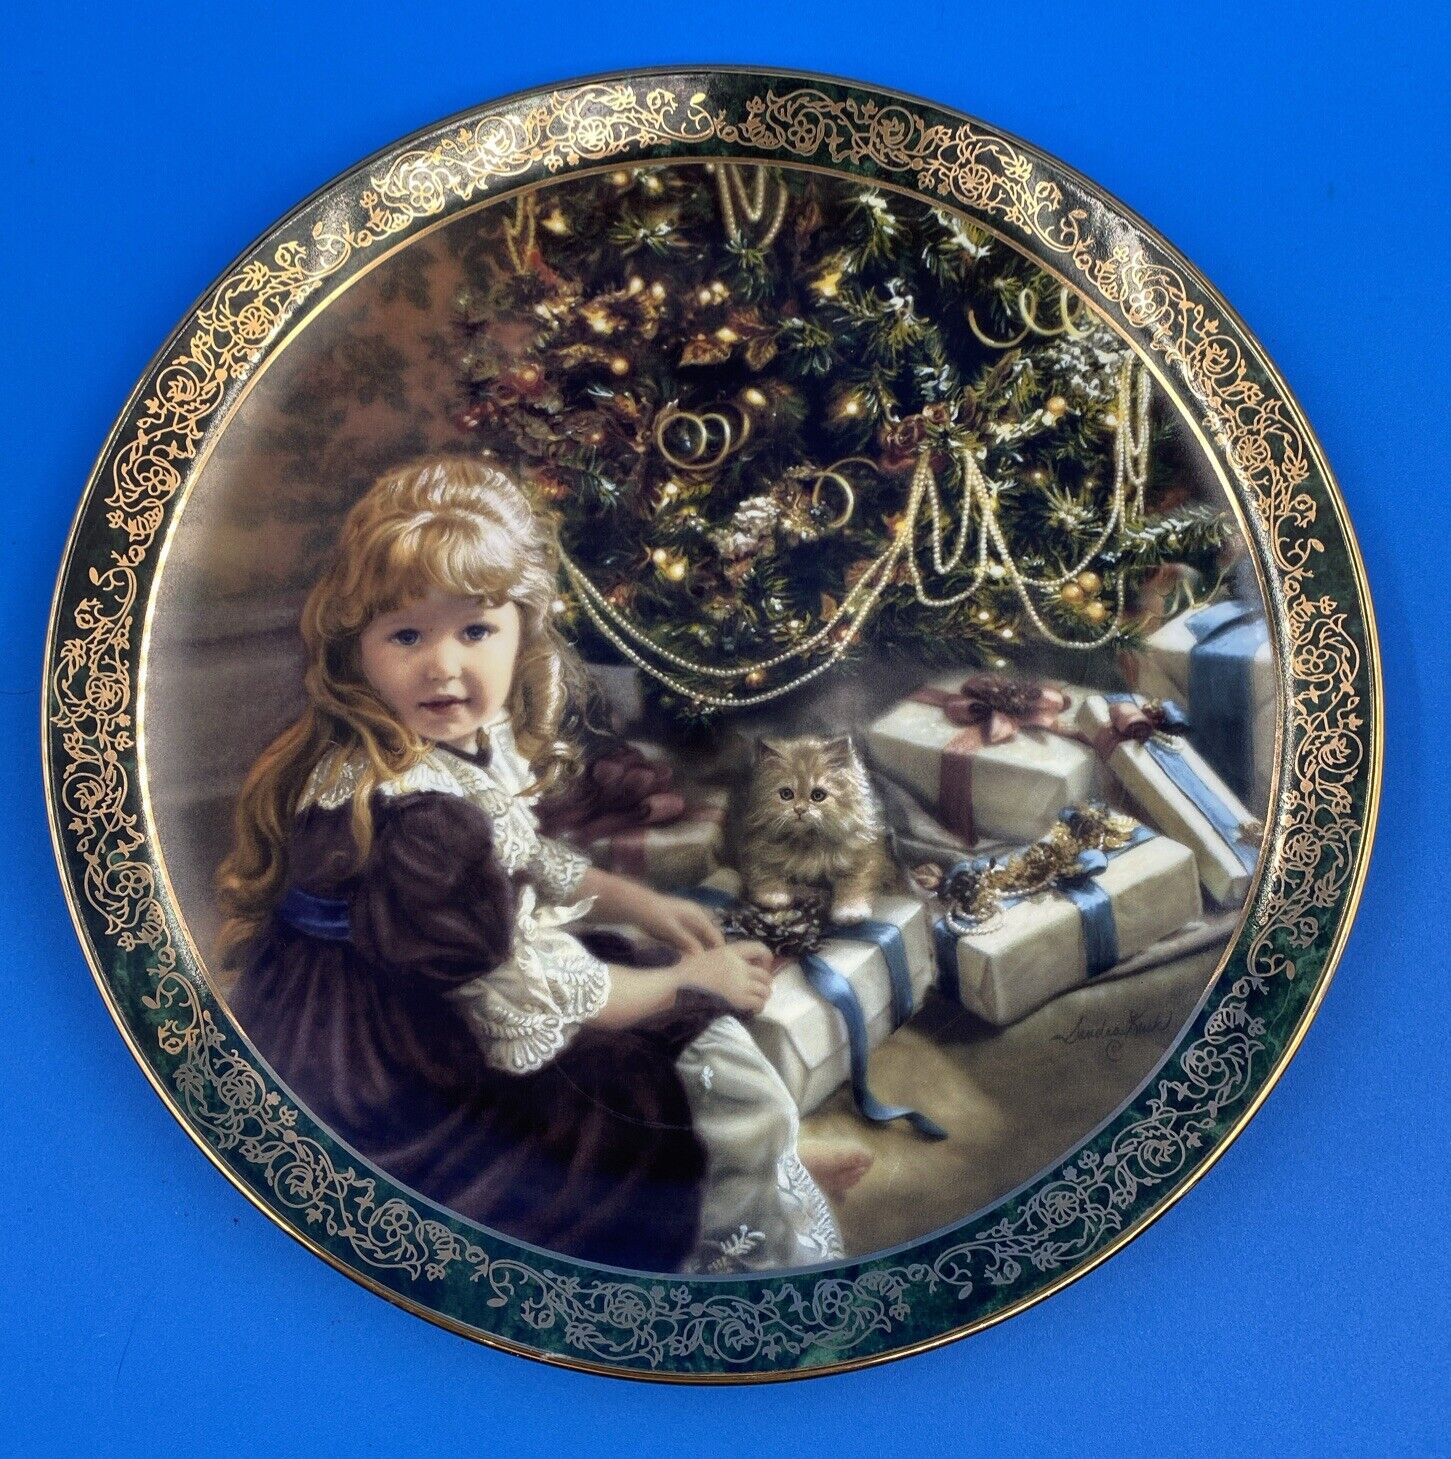 Reco Collection Plate “Christmas Day Joy” by Sandra Kuck 9.5” Limited Edition